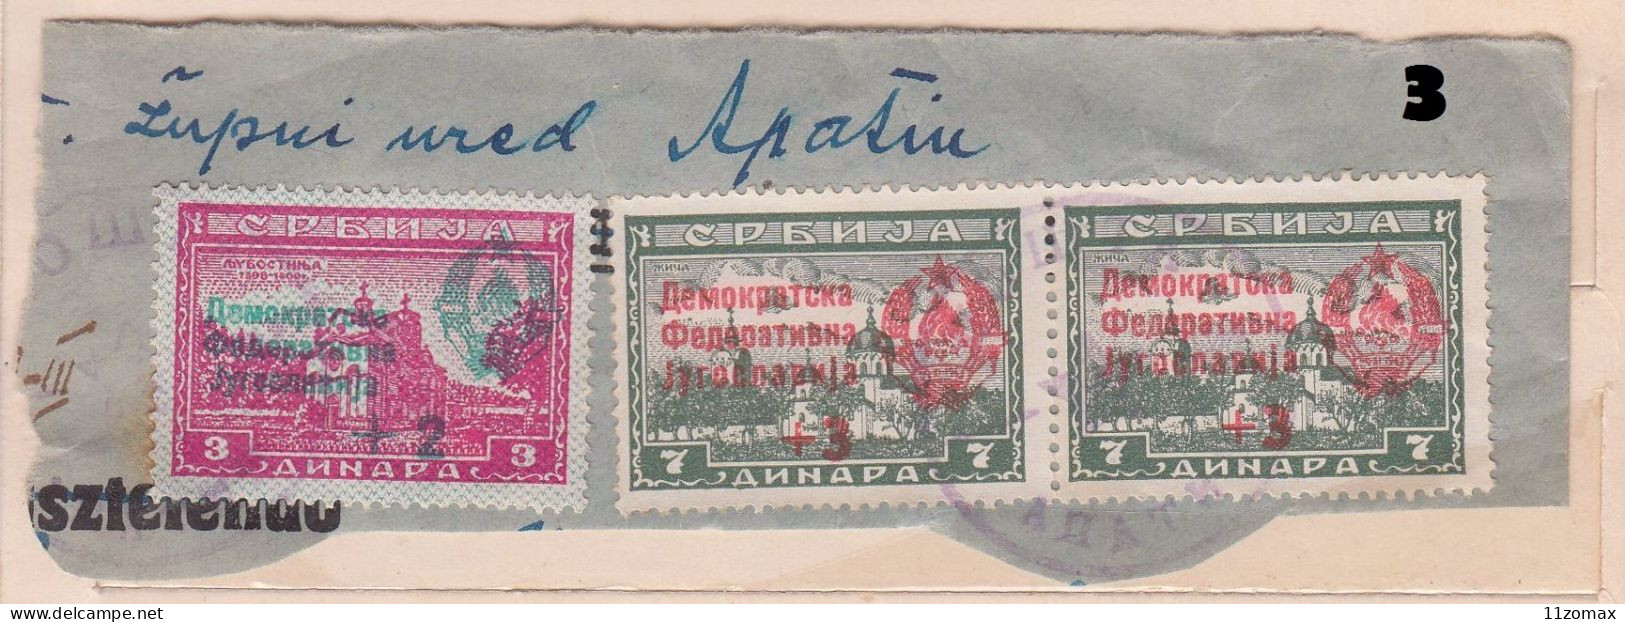 First PARTISAN Partizan POSTMARKS 1945. Apatin VIPauction001 - Covers & Documents